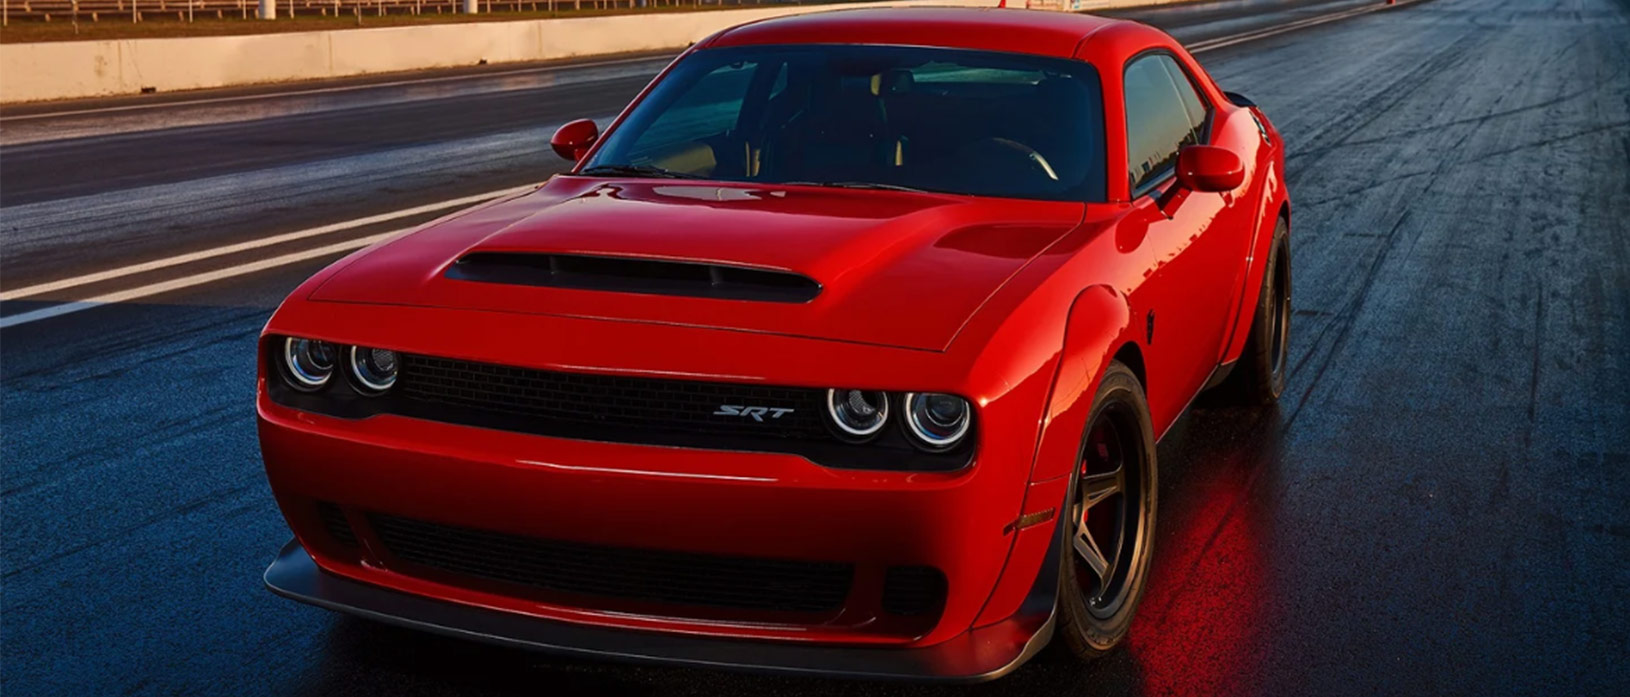 If You Don’t Already Know These Dodge Beauties, You Should